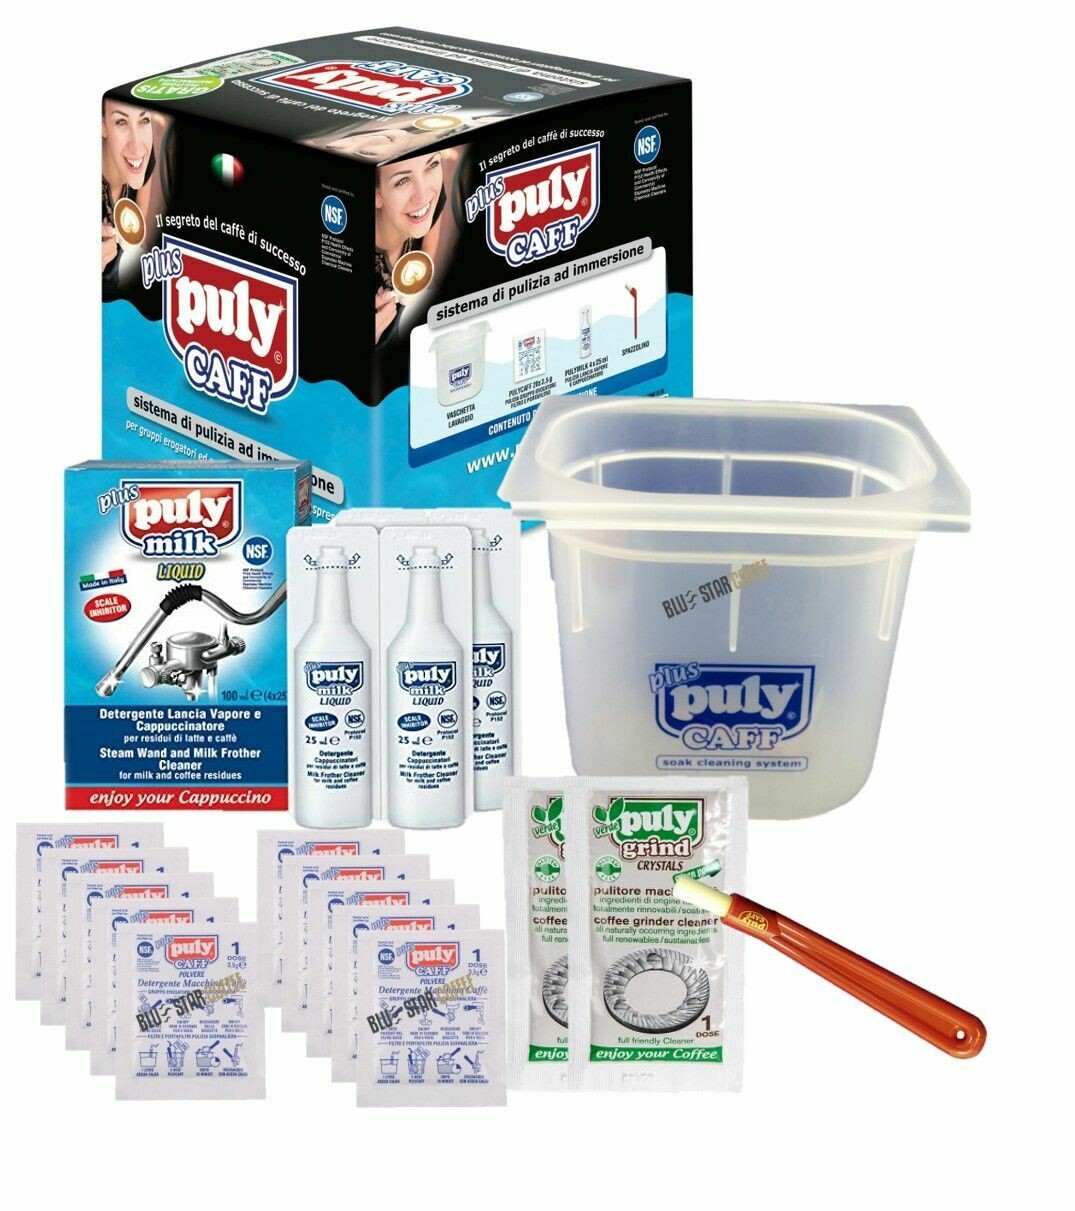 Puly Caff Soak Cleaning System - Kit